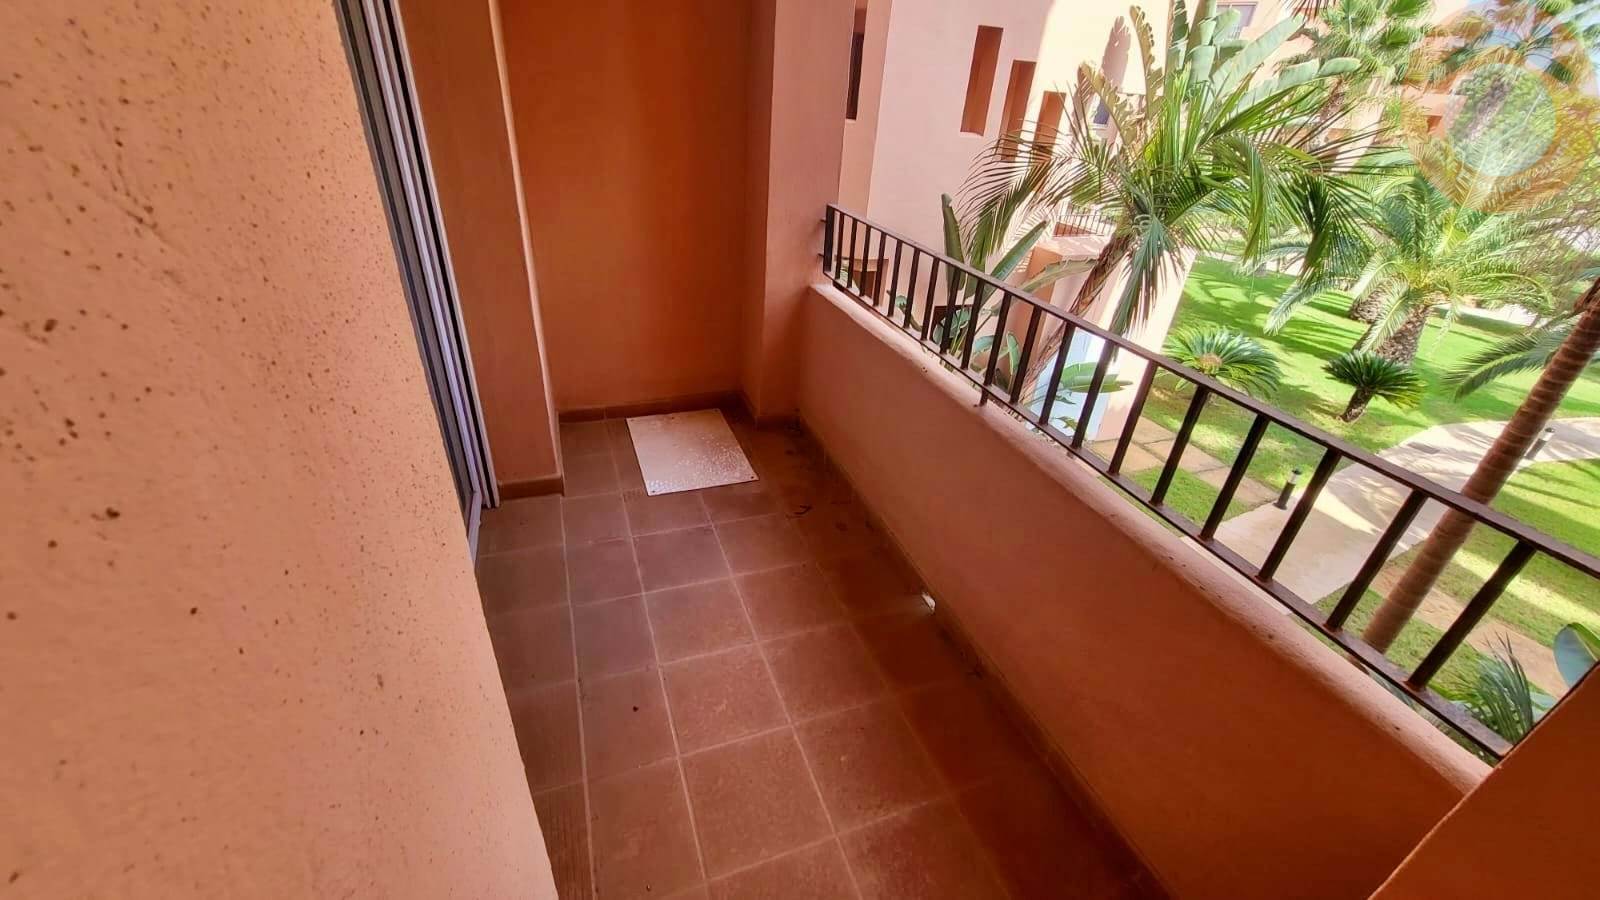  MAR MENOR GOLF RESORT FIRST FLOOR  SOUTH WEST FACING APARTMENT WITH GOLF VIEWS